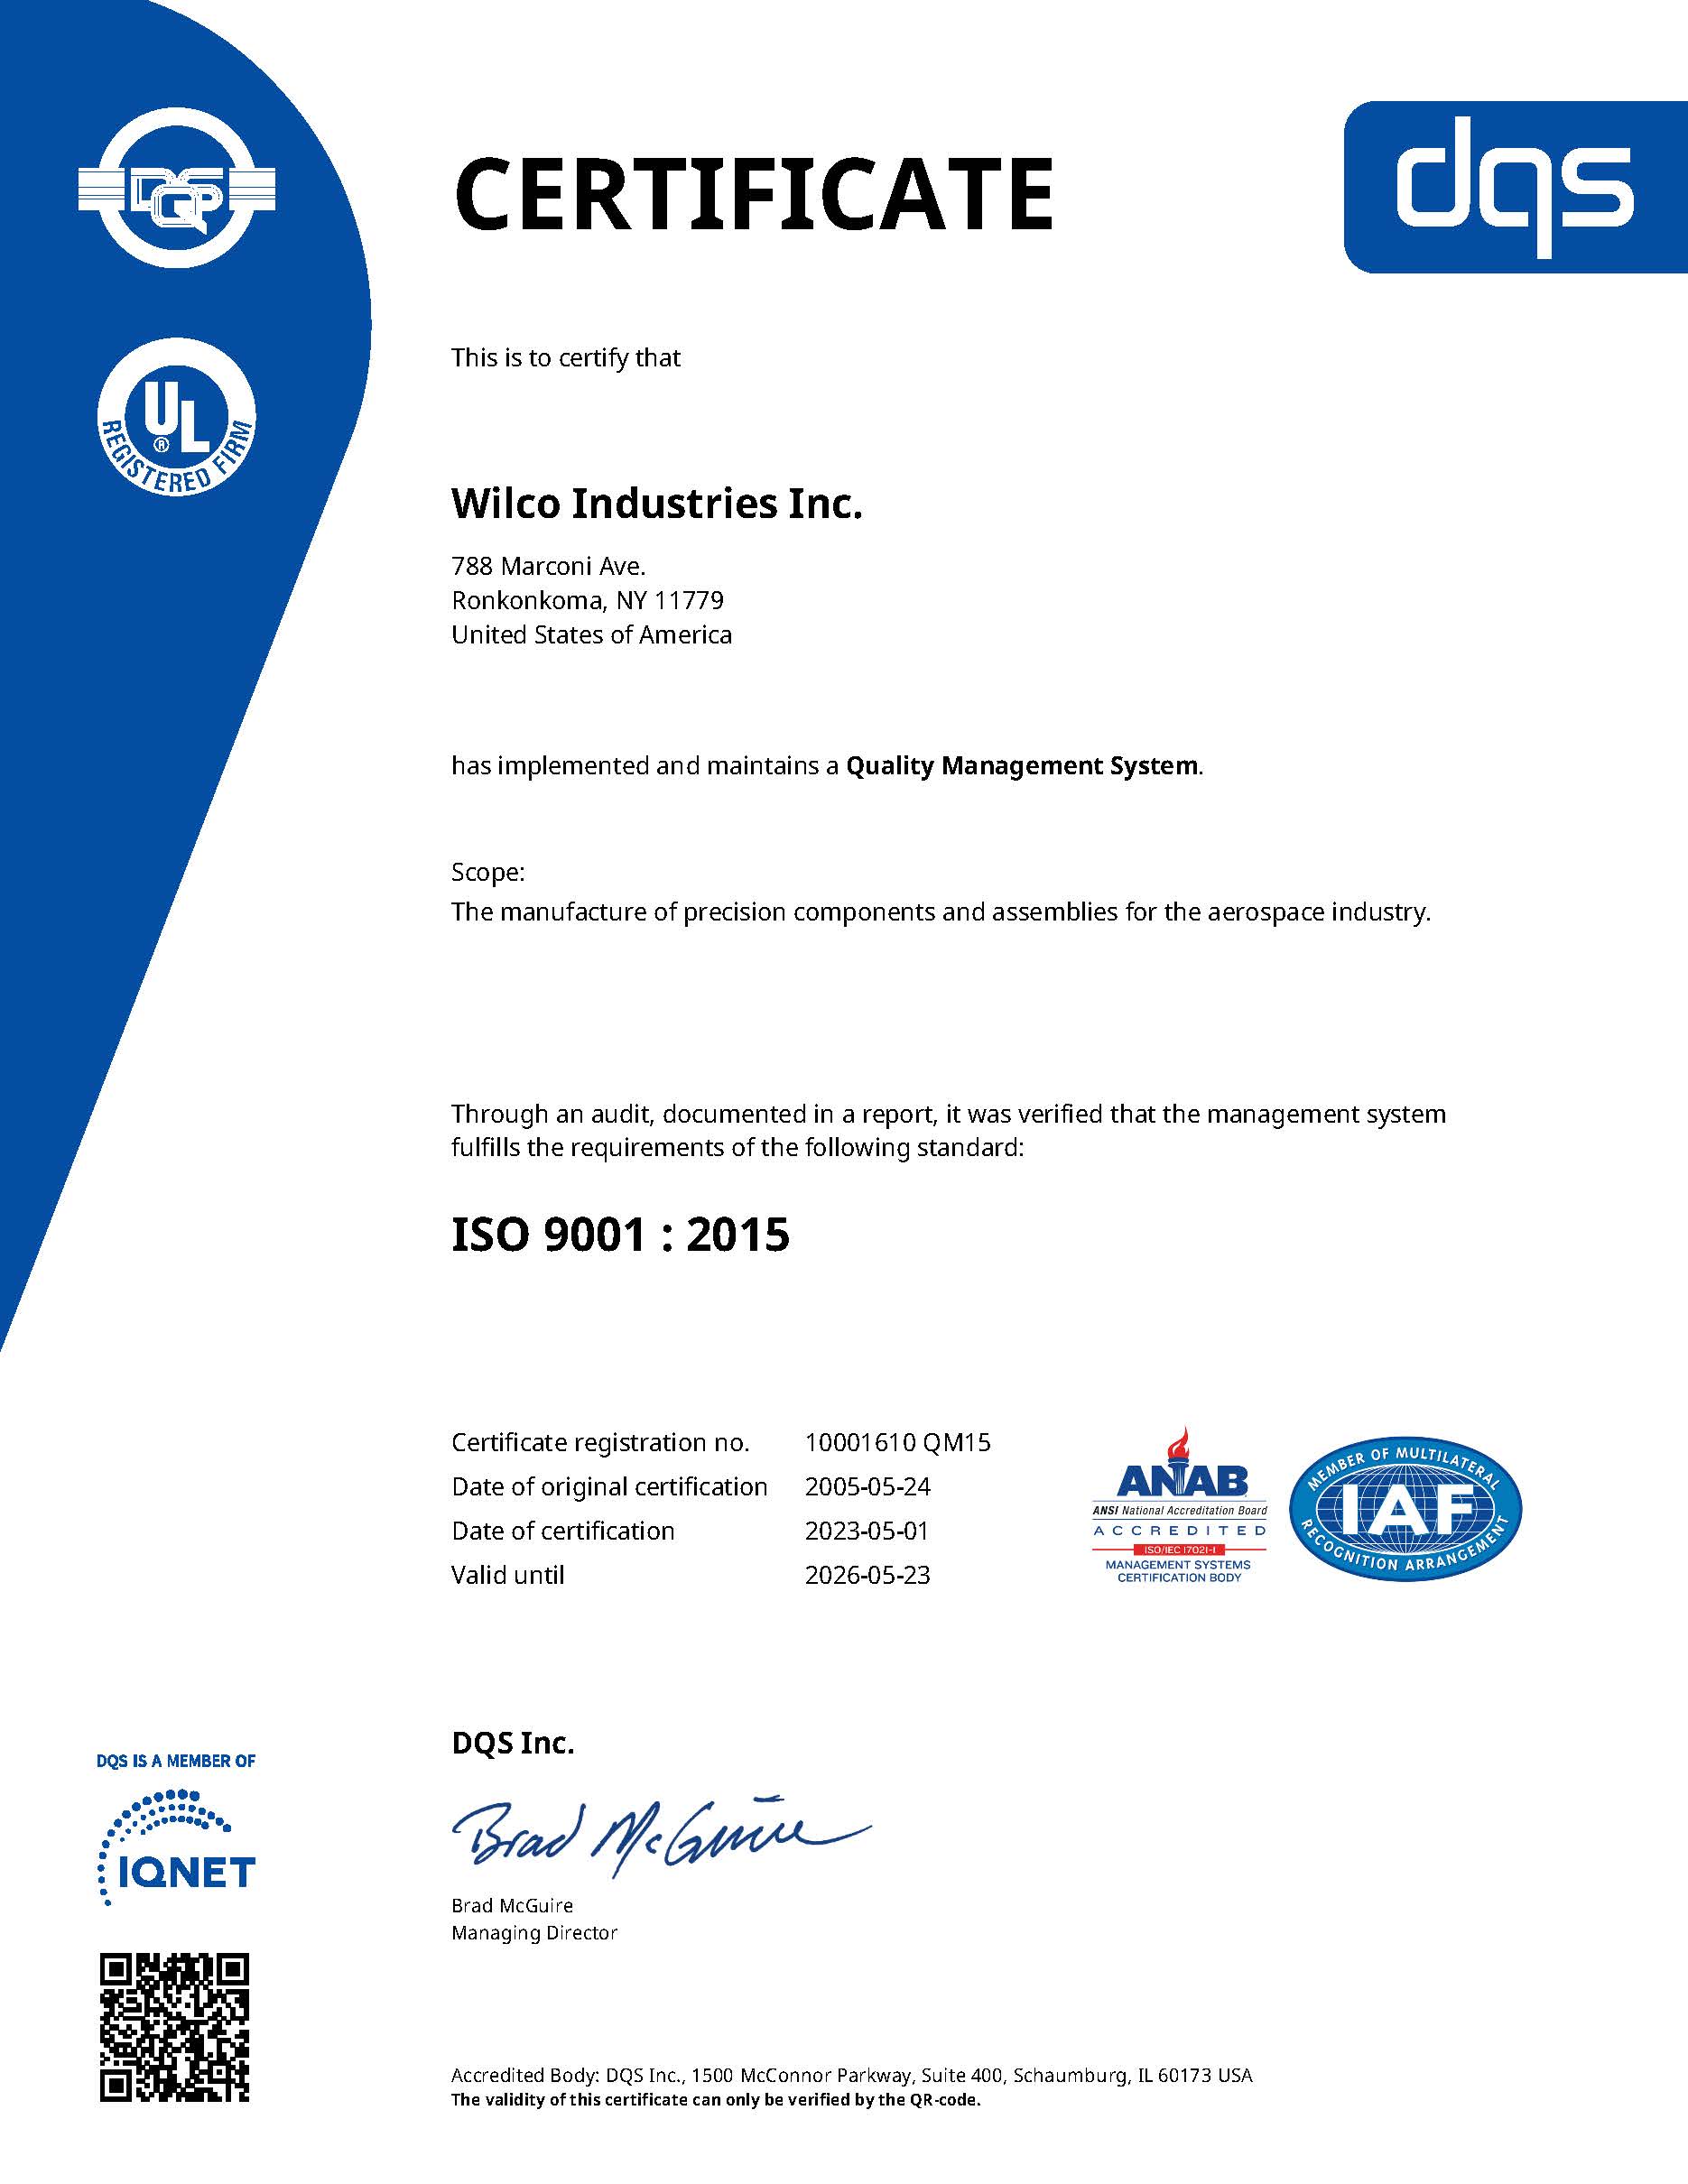 AS 9100 Certification